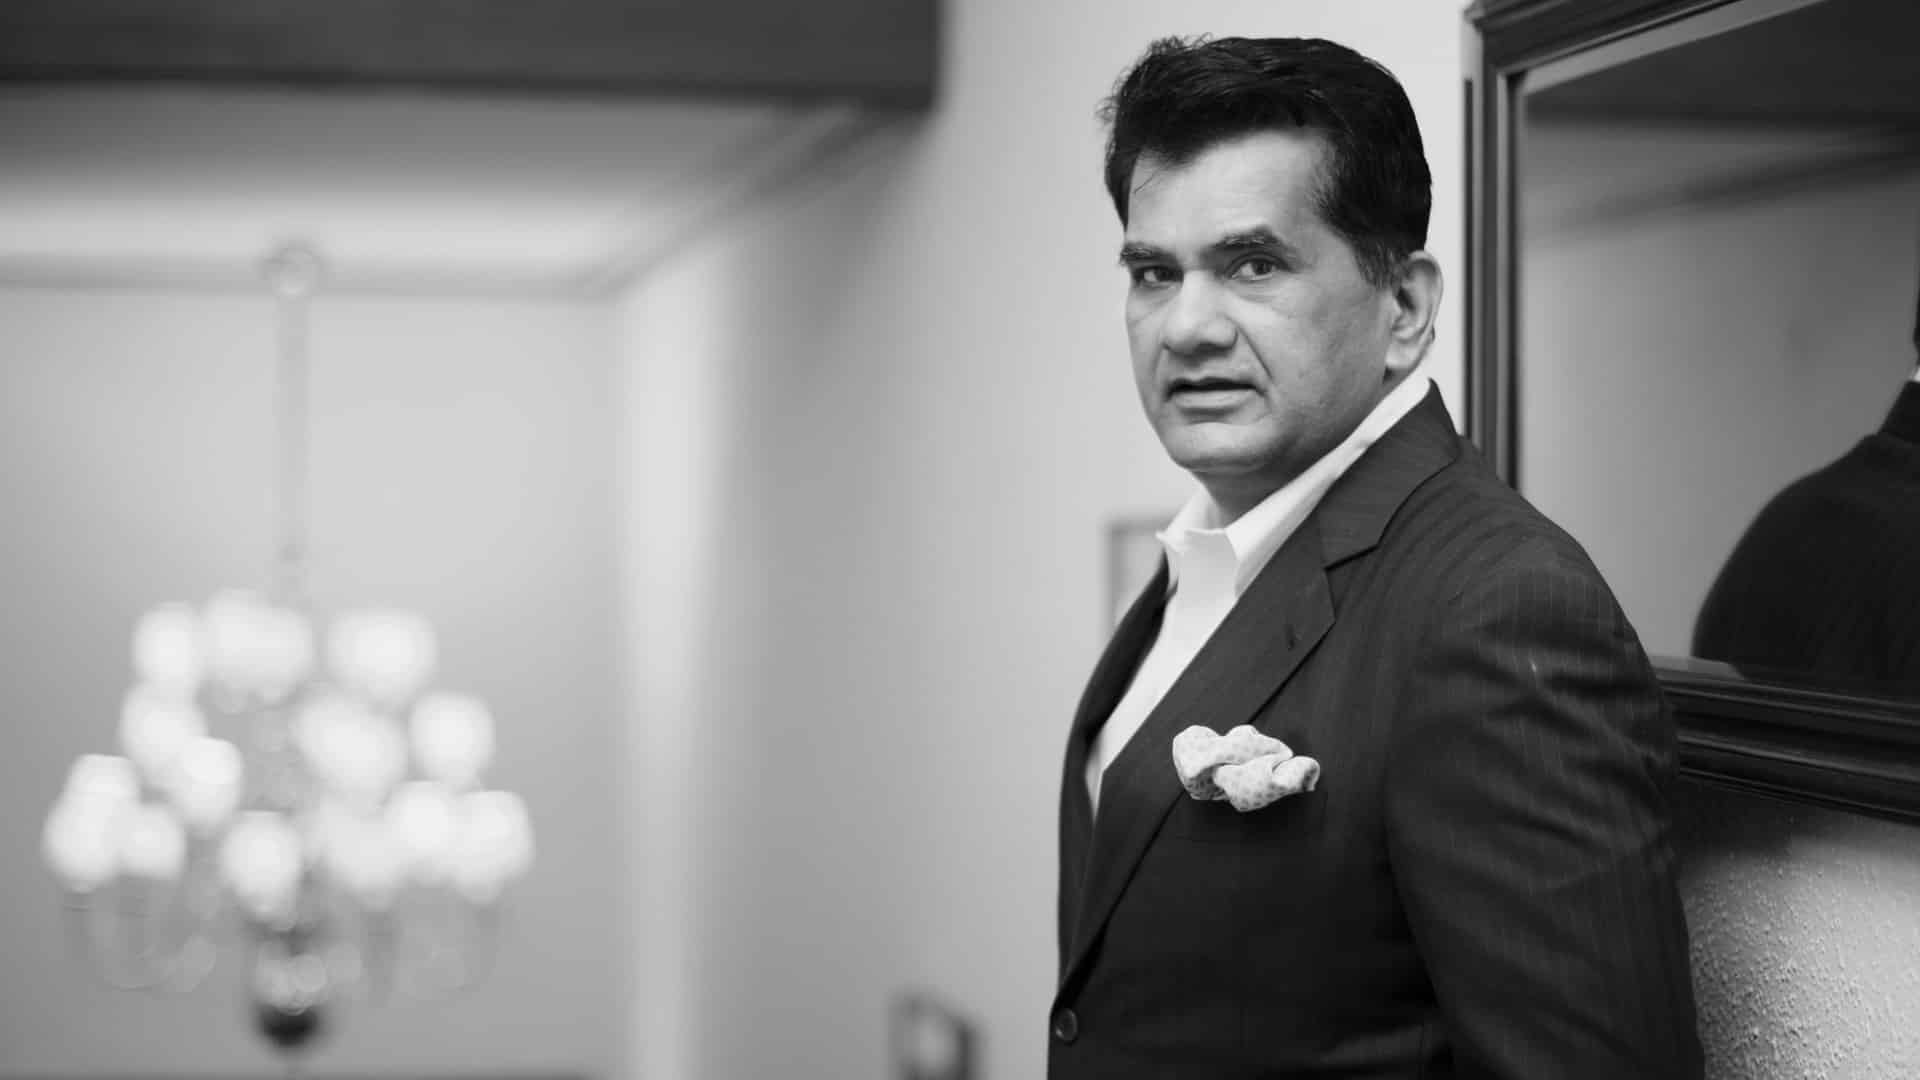 We need to adopt AI and accelerate it across all sectors, says Amitabh Kant